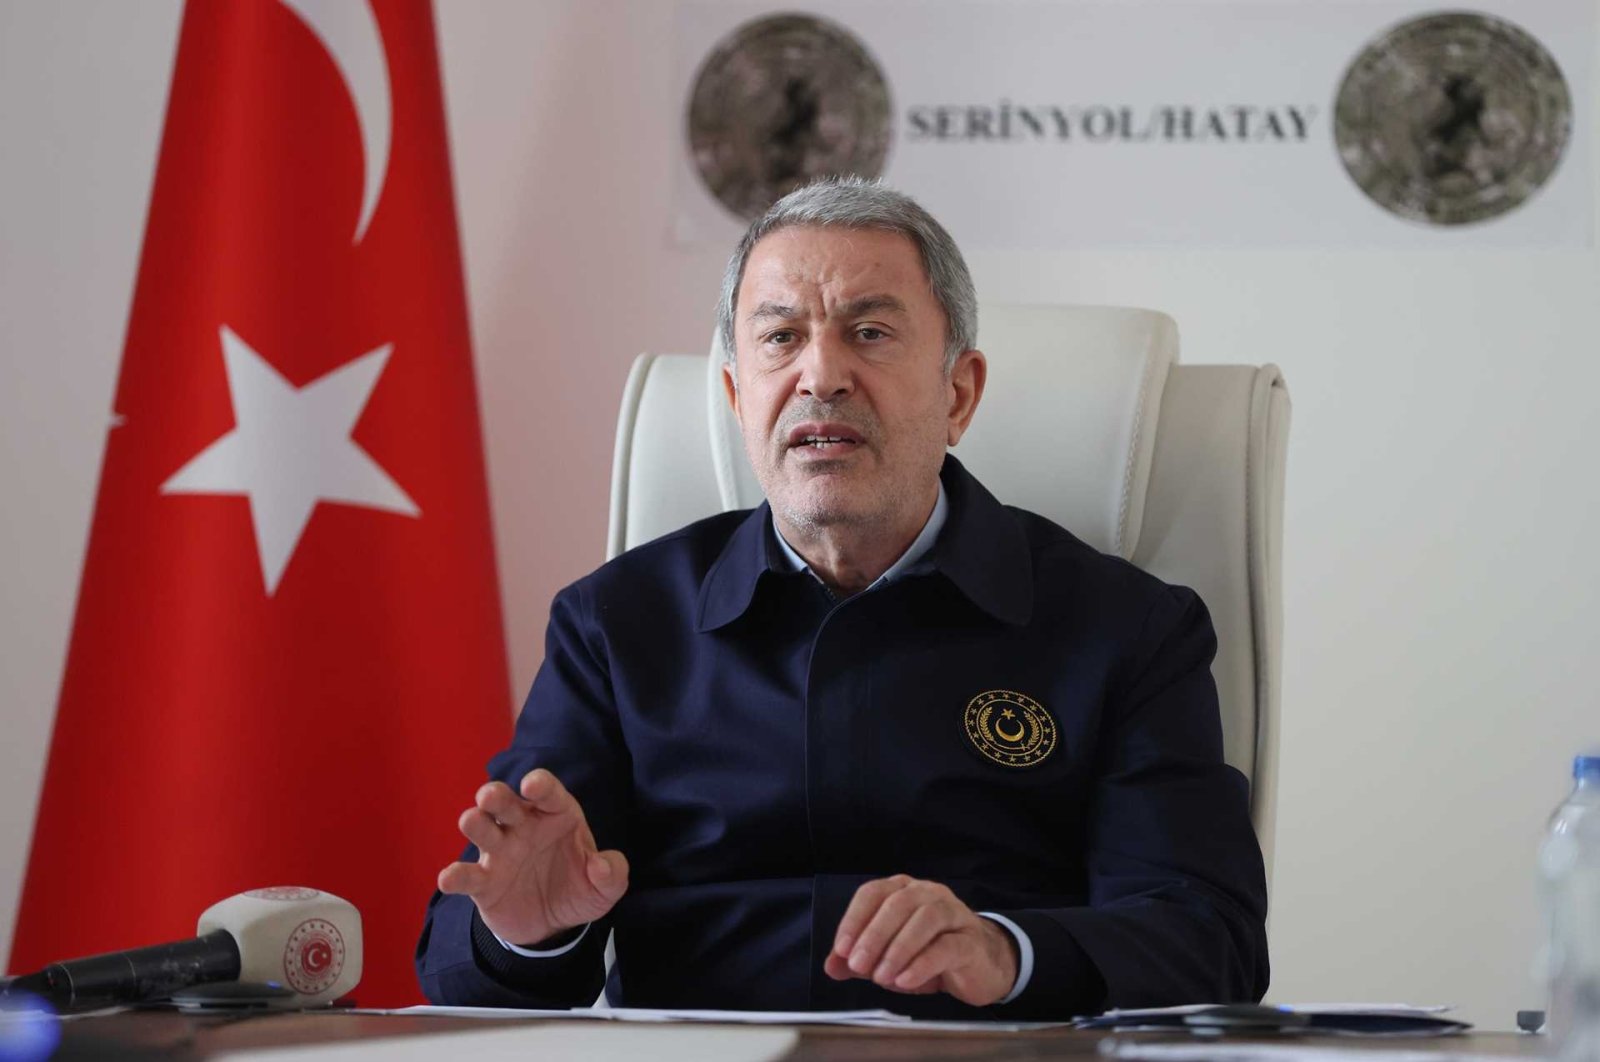 Defense Minister Hulusi Akar is seen during a videoconference with high-level military officials in Hatay province&#039;s Serinyol district, Türkiye, Feb. 20, 2023. (DHA Photo)